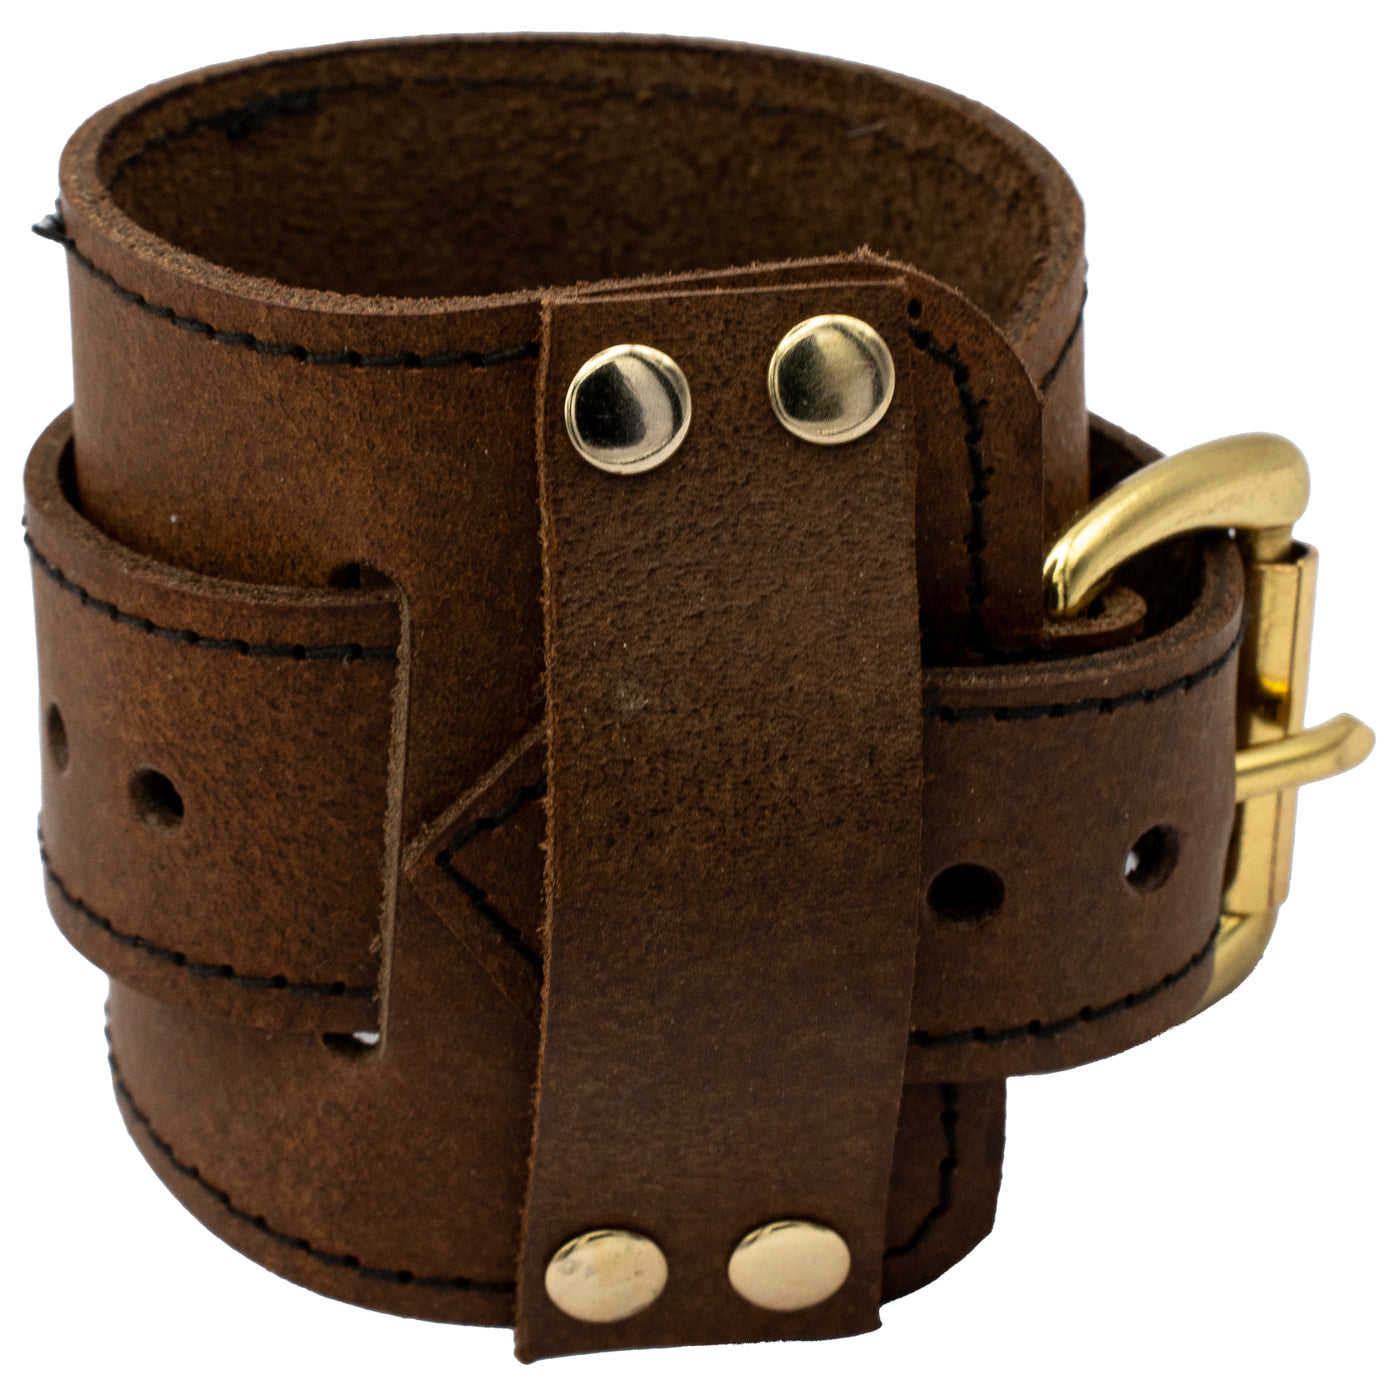 Wide Real Leather Wristband